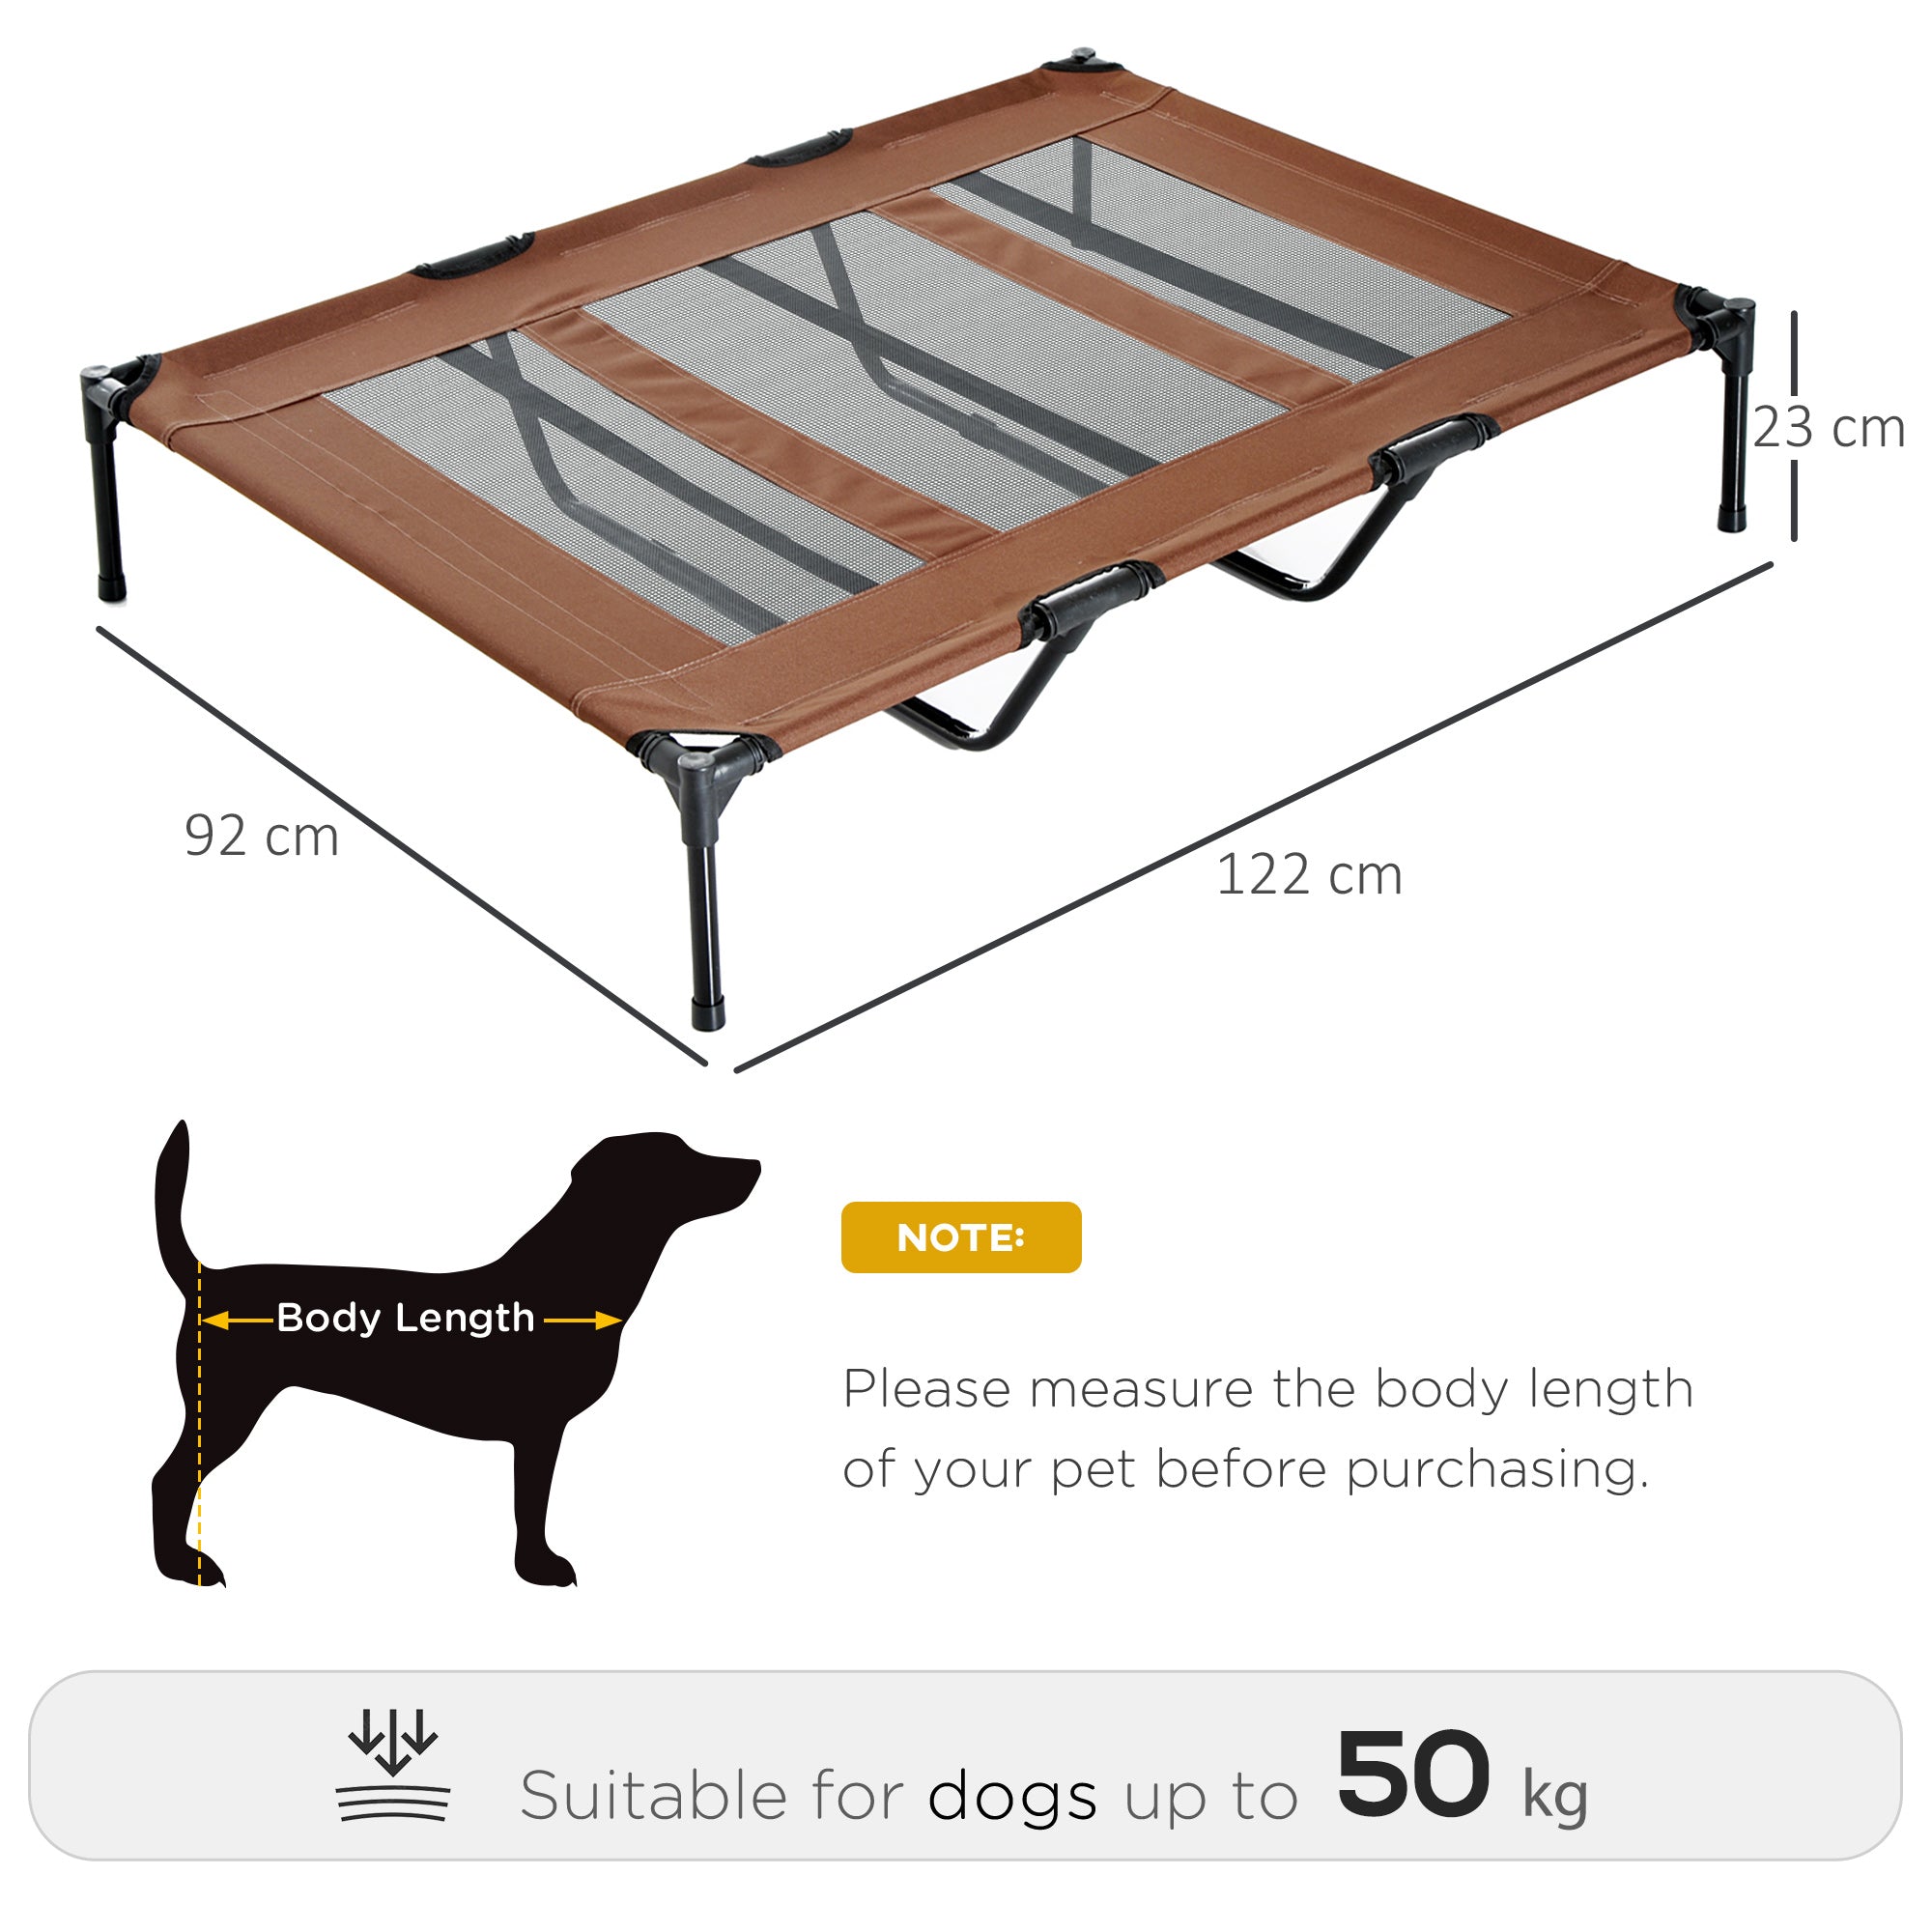 PawHut Cooling Elevated Dog Bed Portable Raised Pet Cot with Breathable Mesh, No-Slip Rubber Feet for Indoor & Outdoor Use, Brown - Inspirely